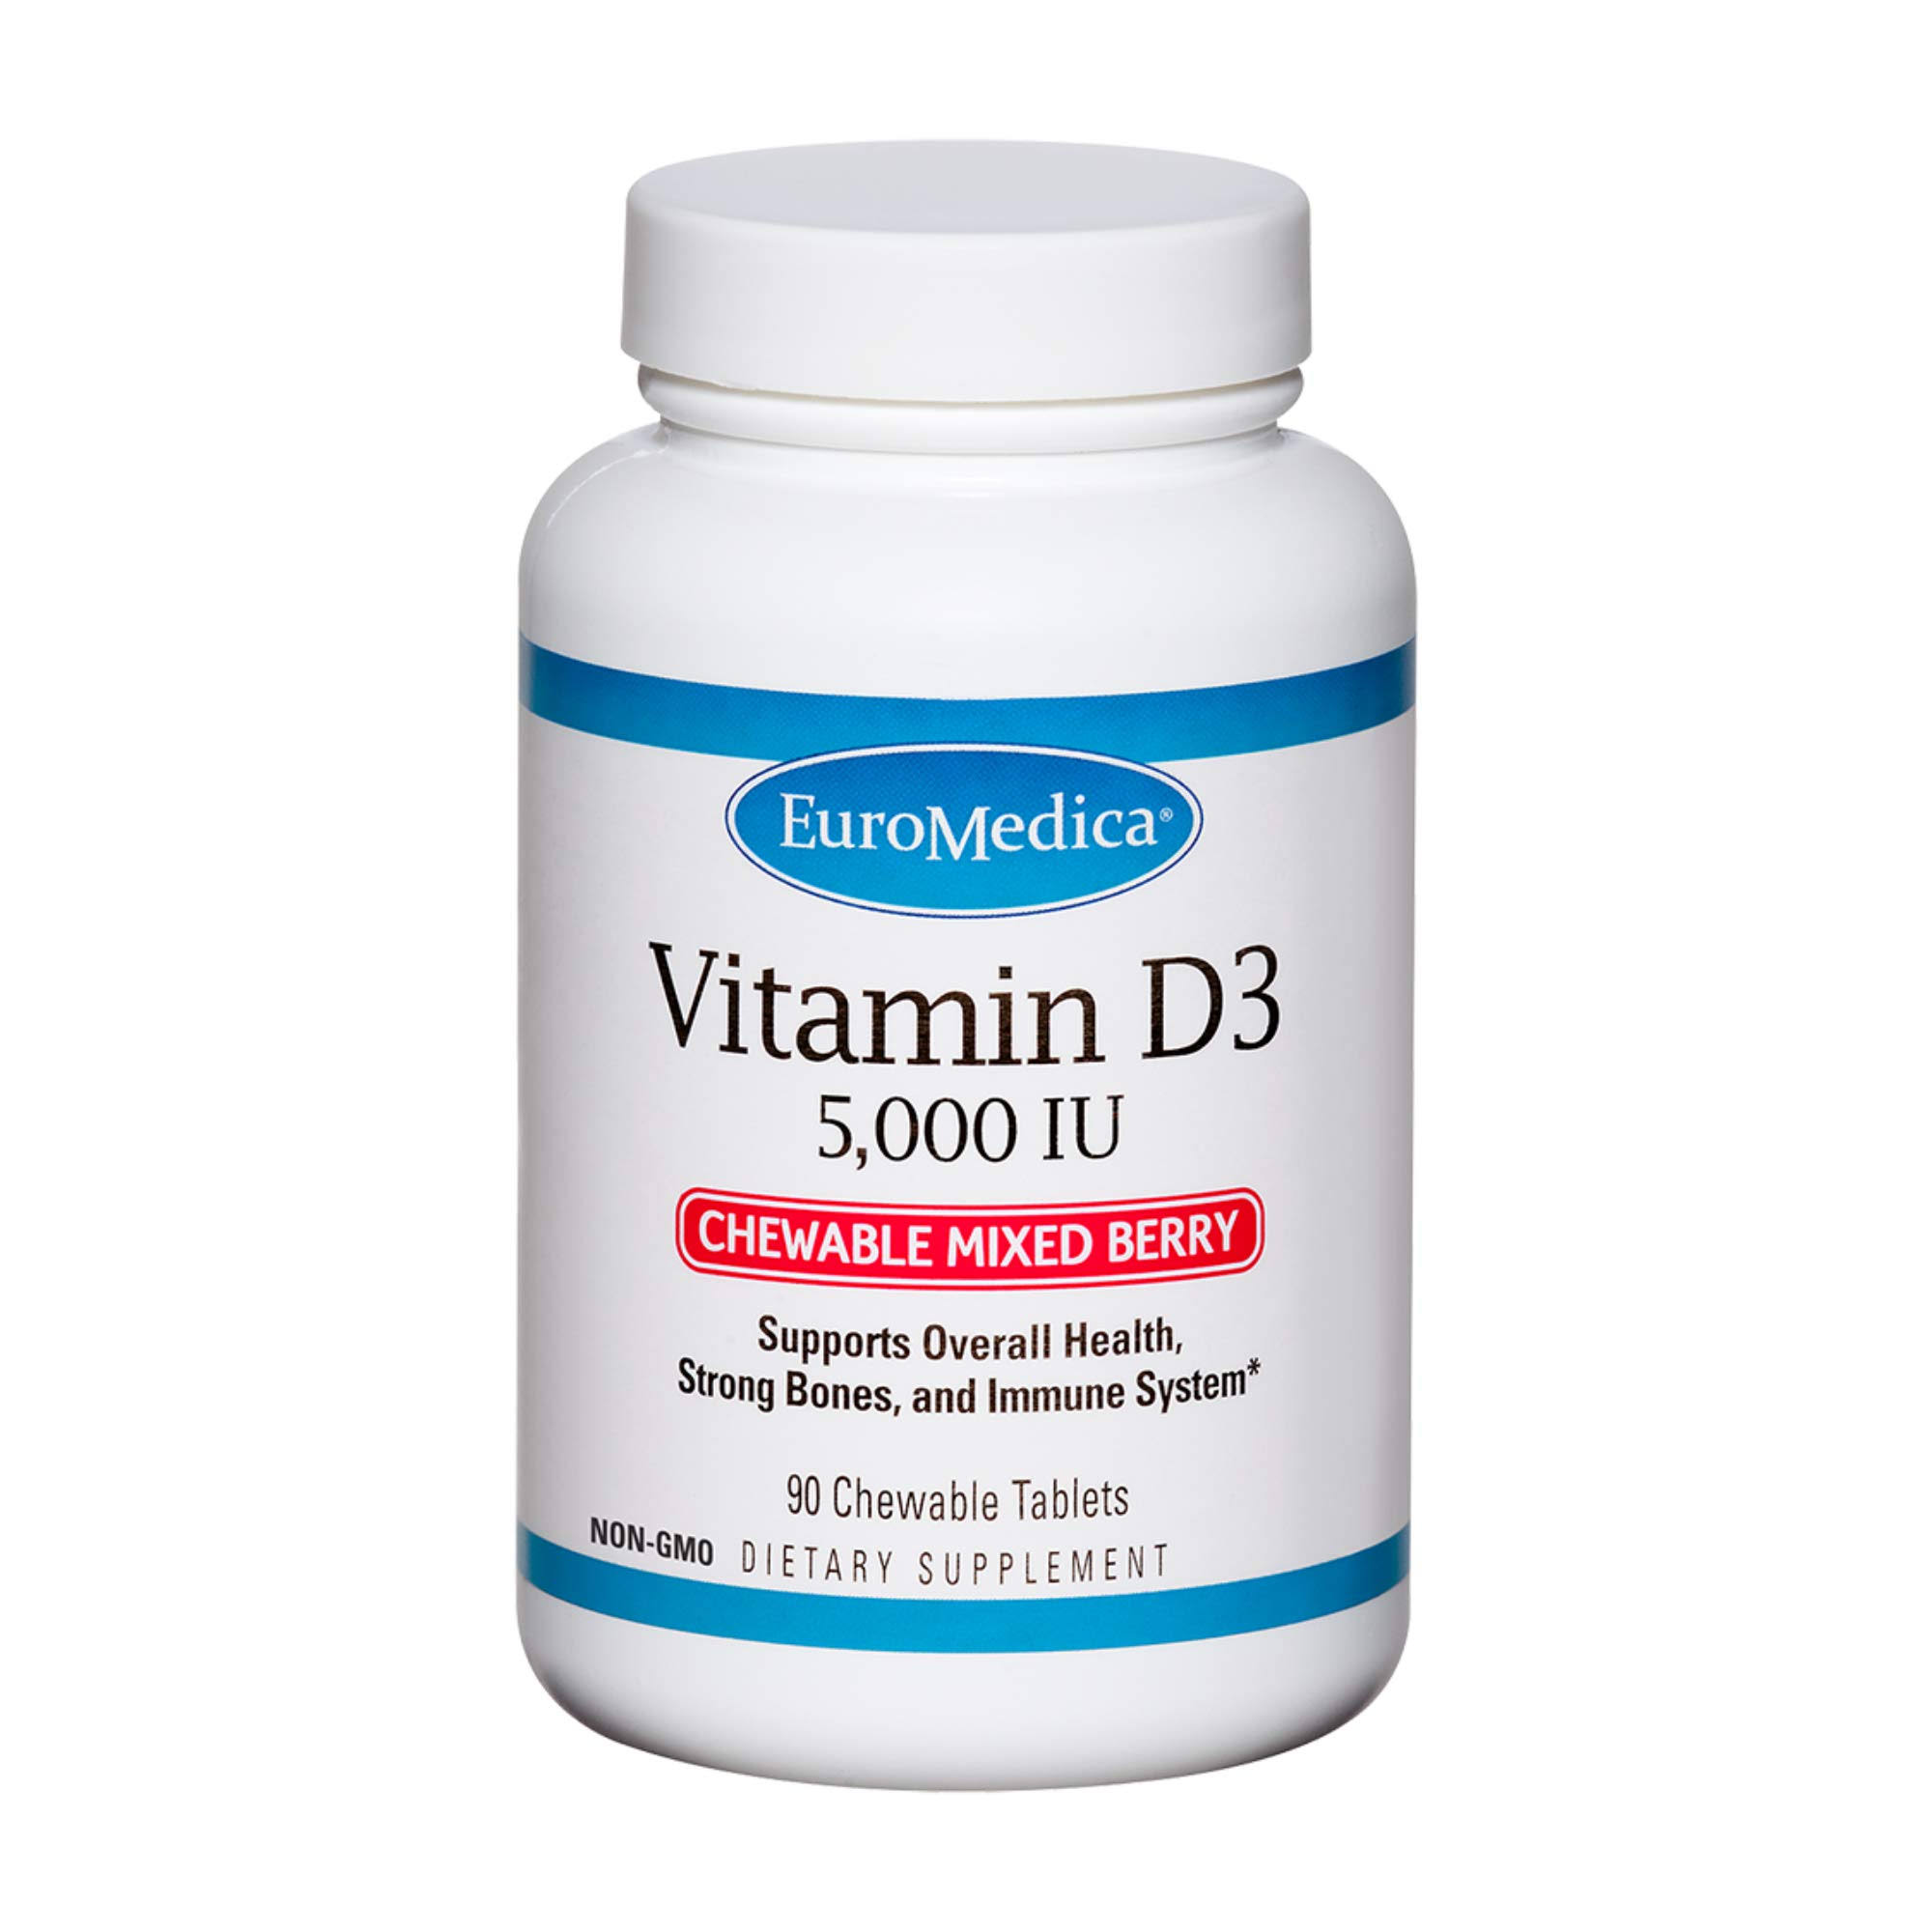 EuroMedica - Vitamin D3 Mixed Berry 5000 IU - 90 Chewable Tablets